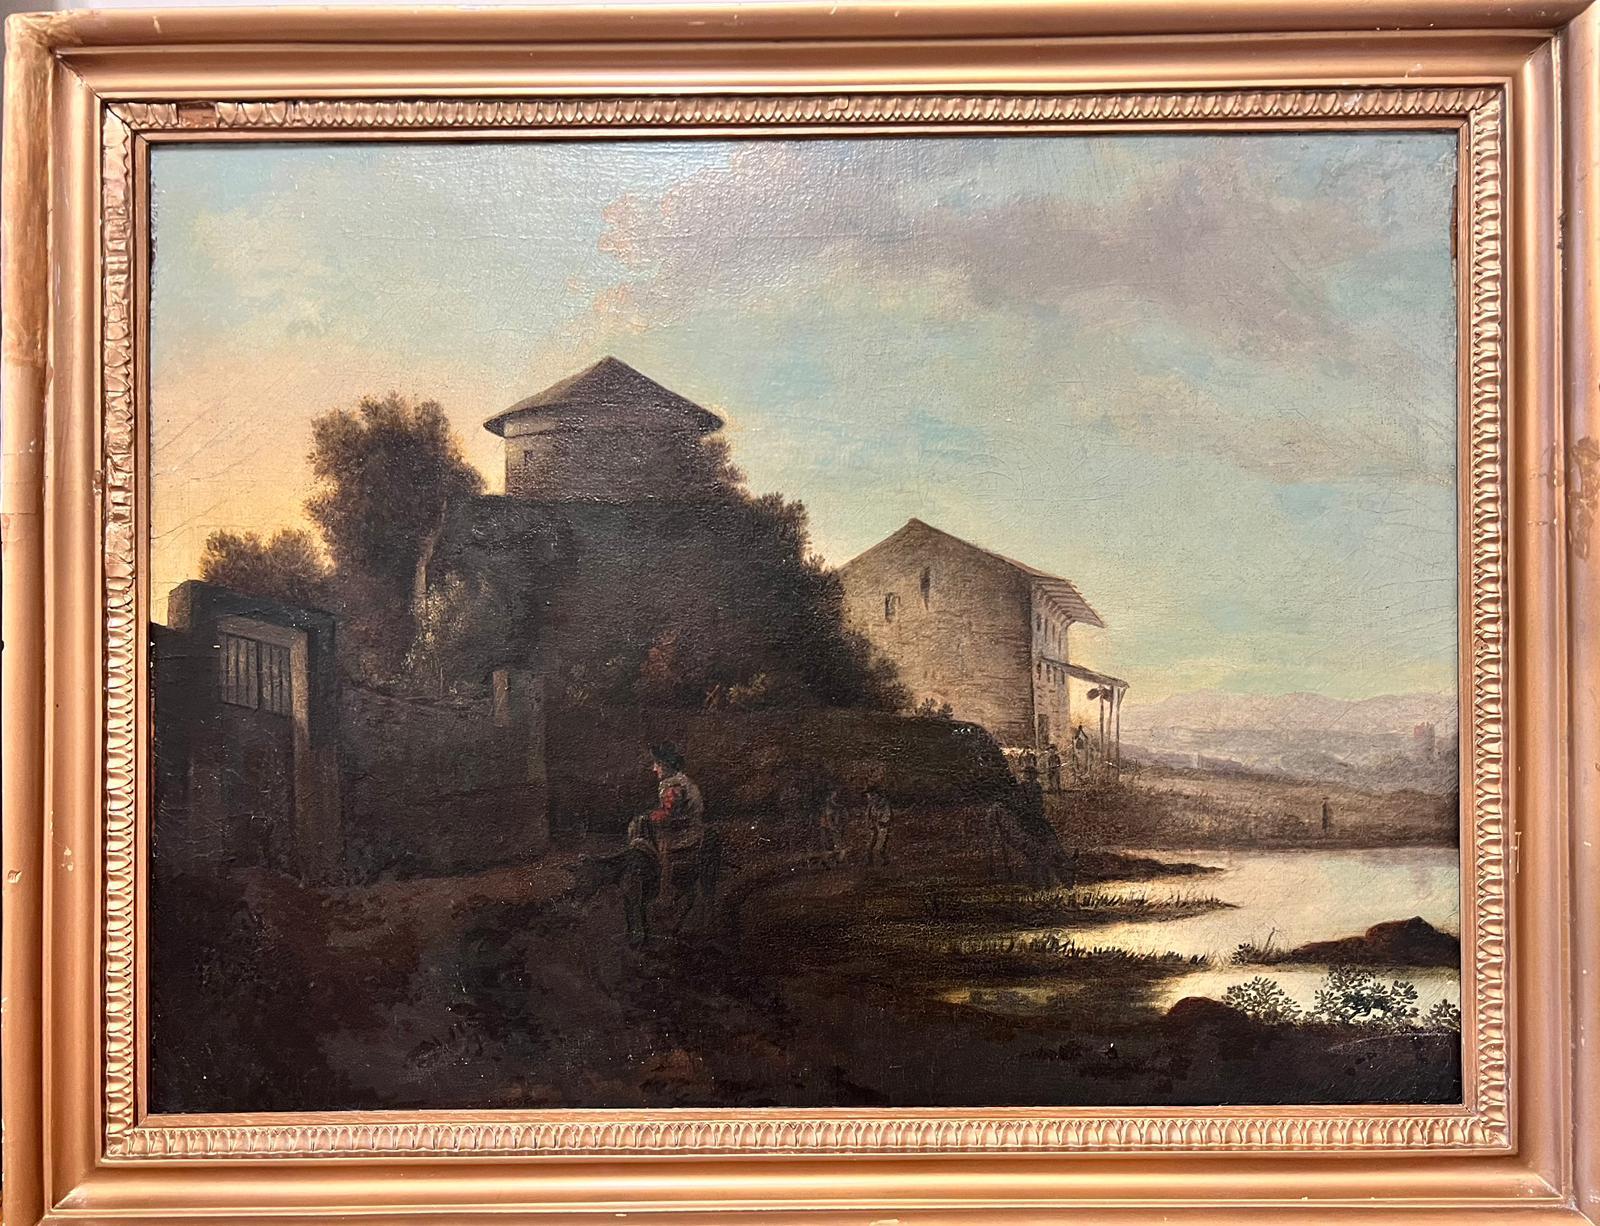 A River Landscape With A Figure On A Donkey
1800's Dutch School
oil painting on canvas, framed
framed: 21 x 27 inches
canvas: 18 x 24 inches 
provenance: private collection, England
condition: very good and sound condition